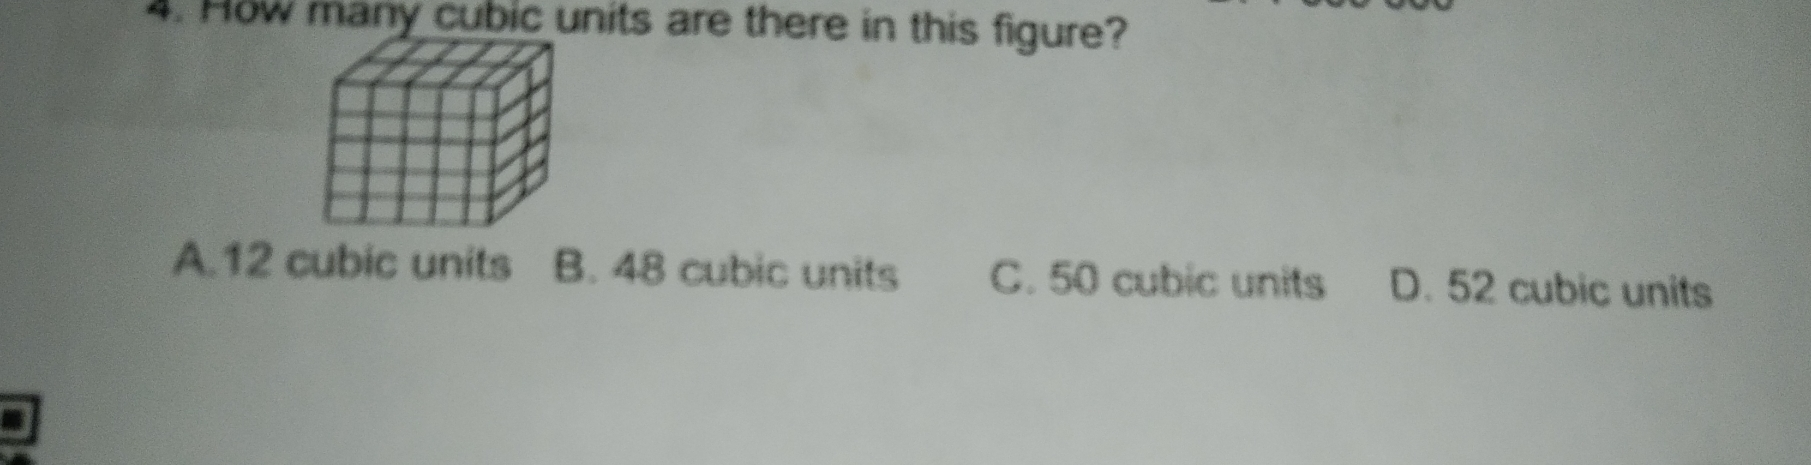 4. How many cubic units are there in this figure? A.12 cubic units B. 48 cubic units C. 50 cubic units D. 52 cubic units